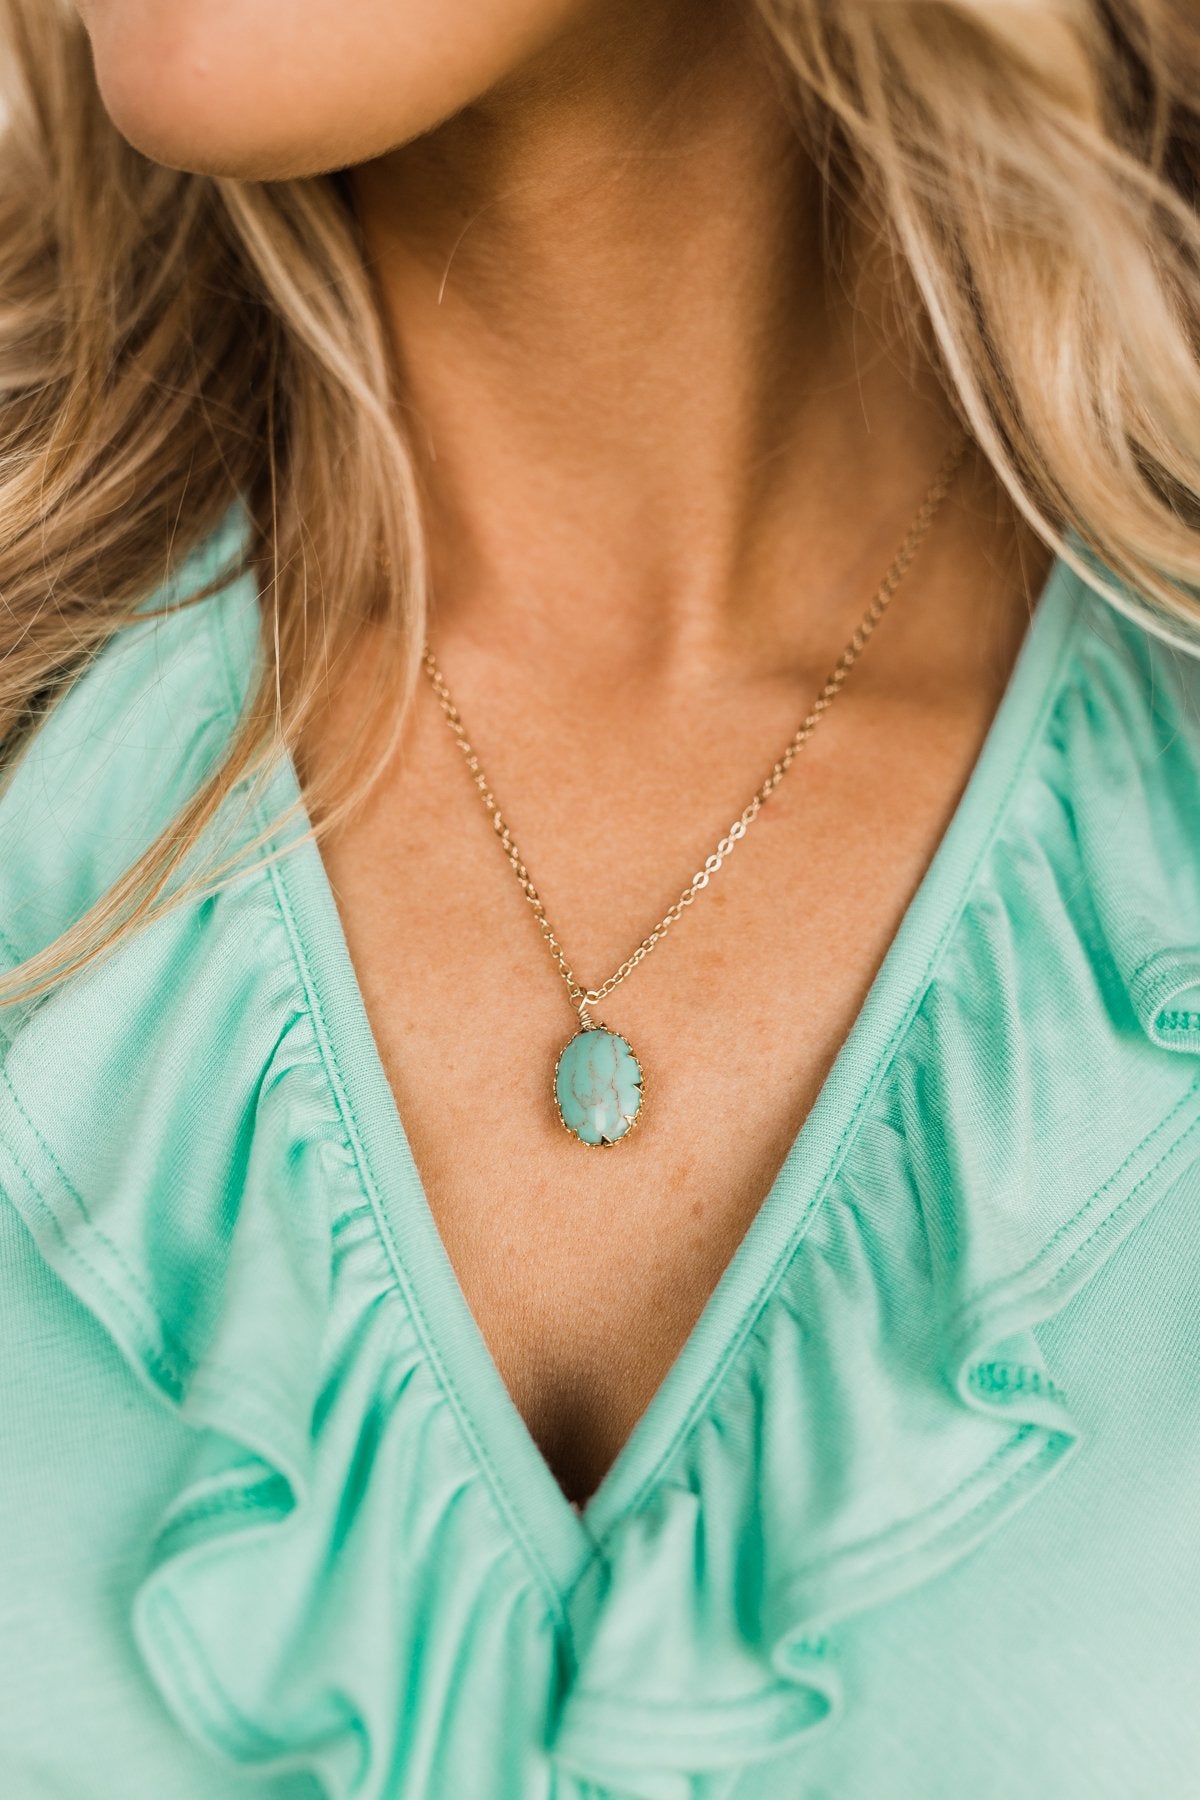 Simply Sophisticated Teardrop Necklace- Turquoise